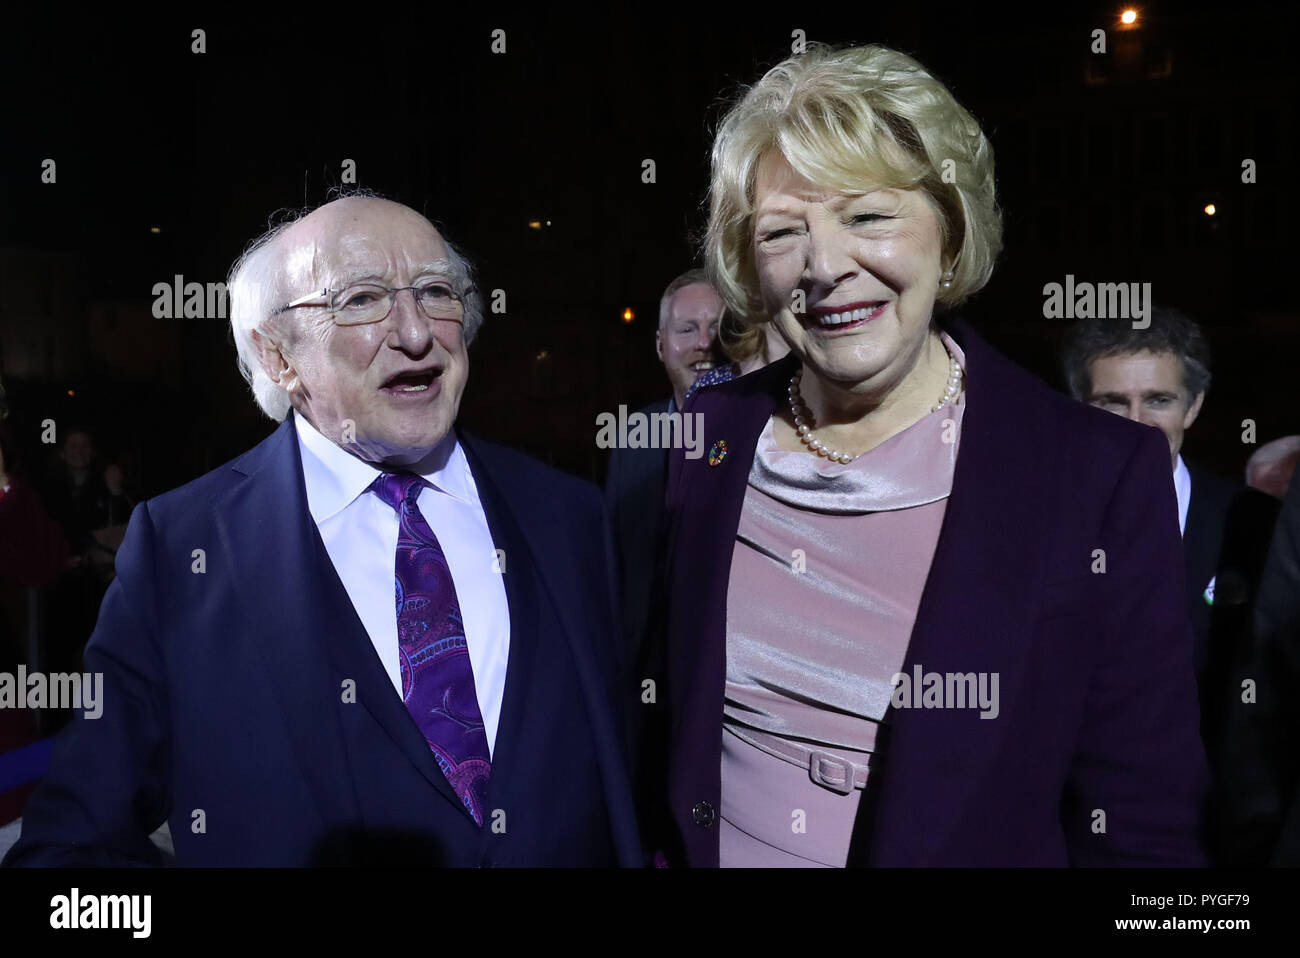 Michael D Higgins and his wife Sabina arrive at Dublin Castle to attend the count in Ireland's presidential election. Stock Photo